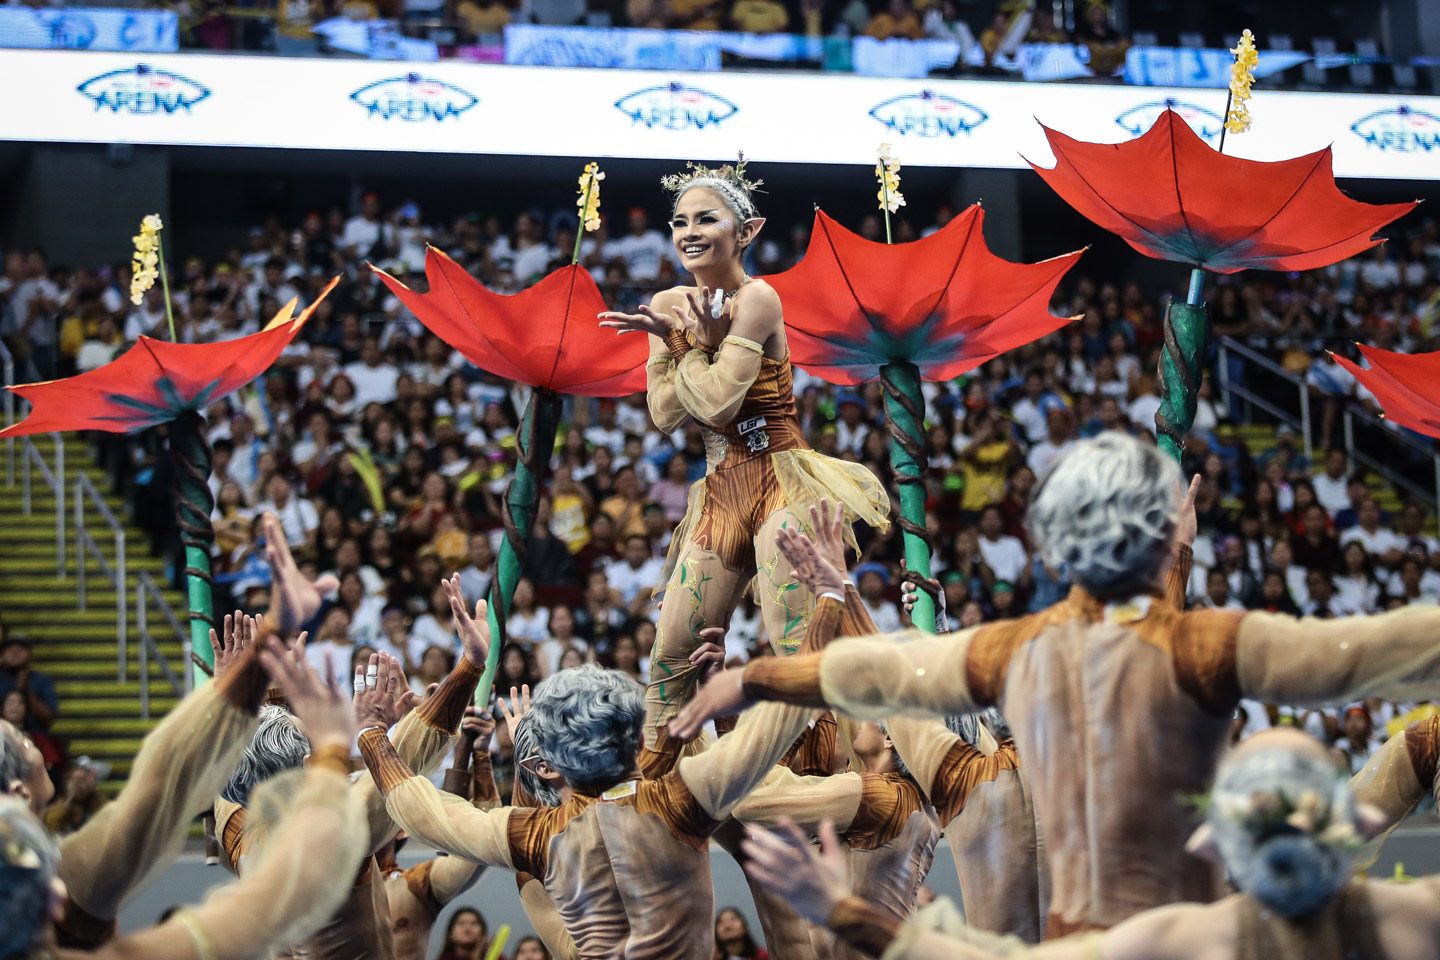 ENCHANTED. The UST Salinggawi Dance Troupe brings the crowd into its own magical world. Photo by Josh Albelda/Rappler 